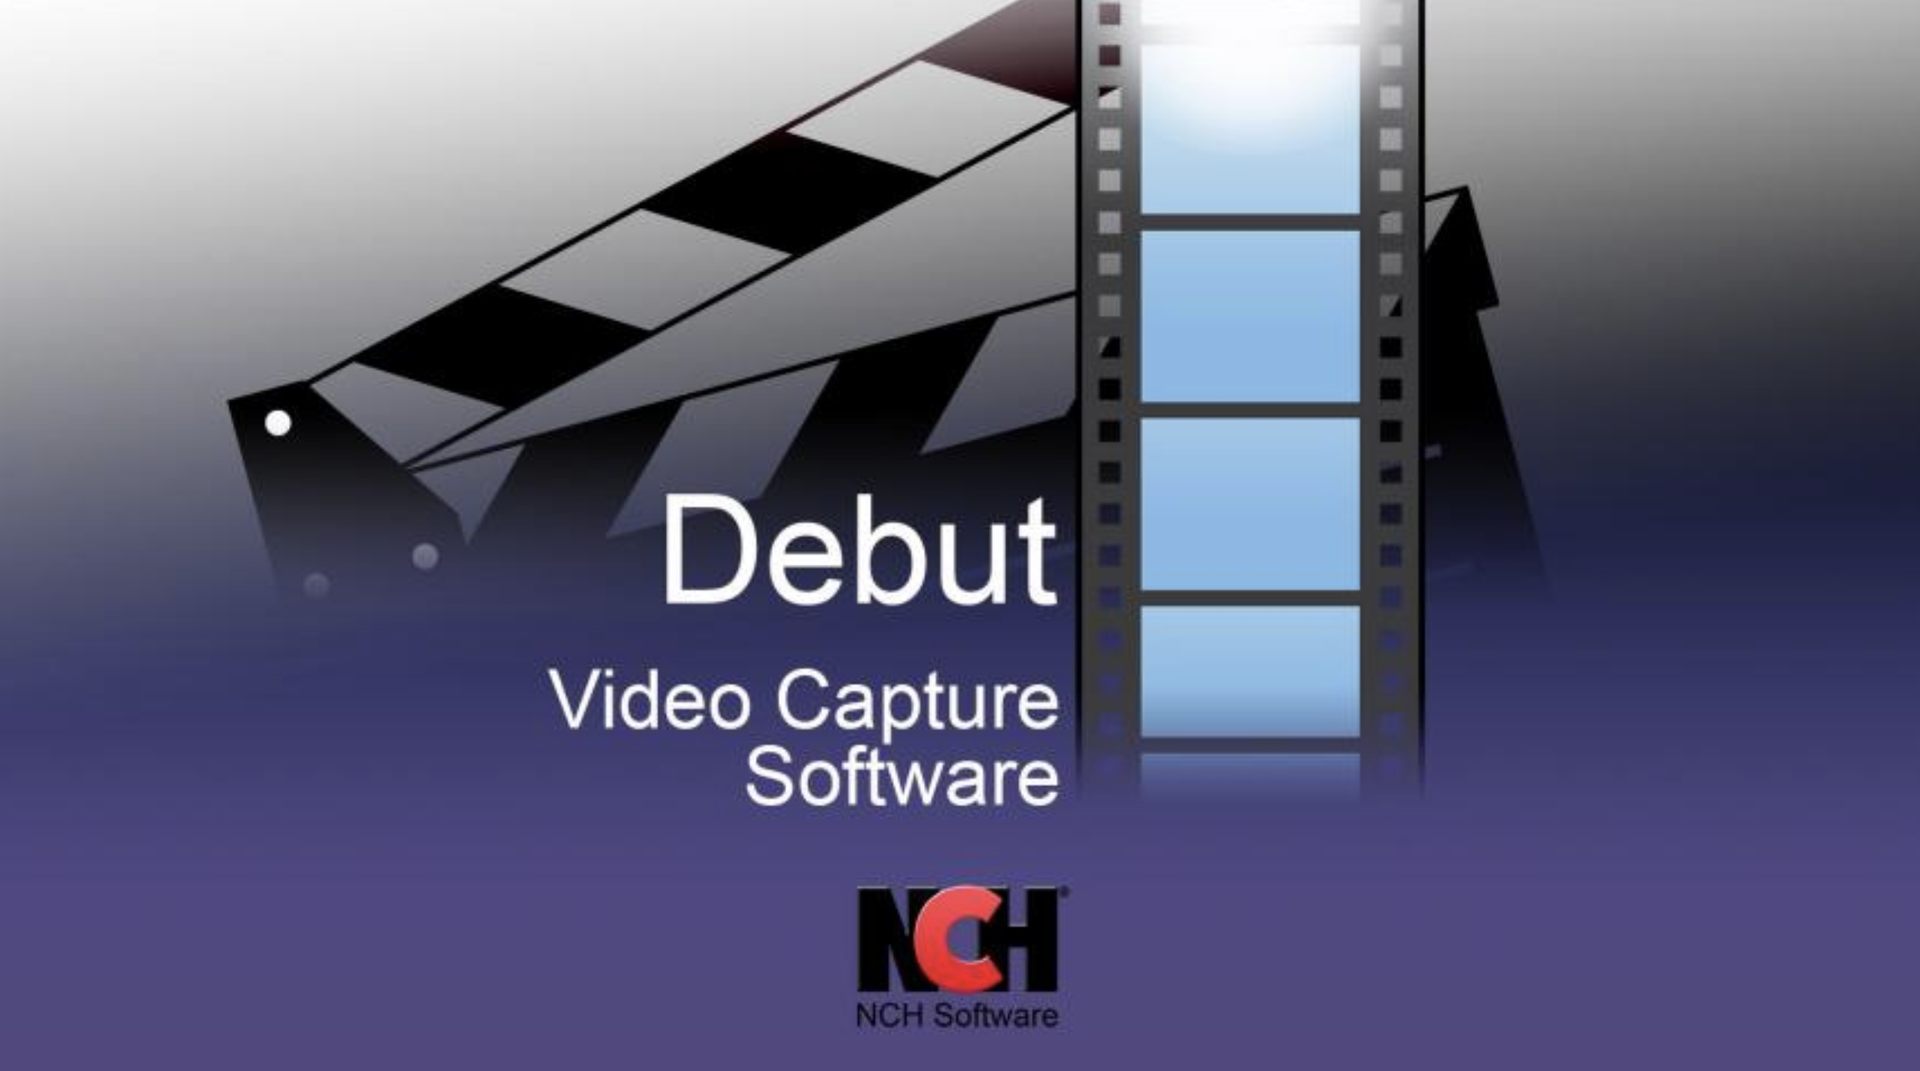 About Debut Video Capture Pro